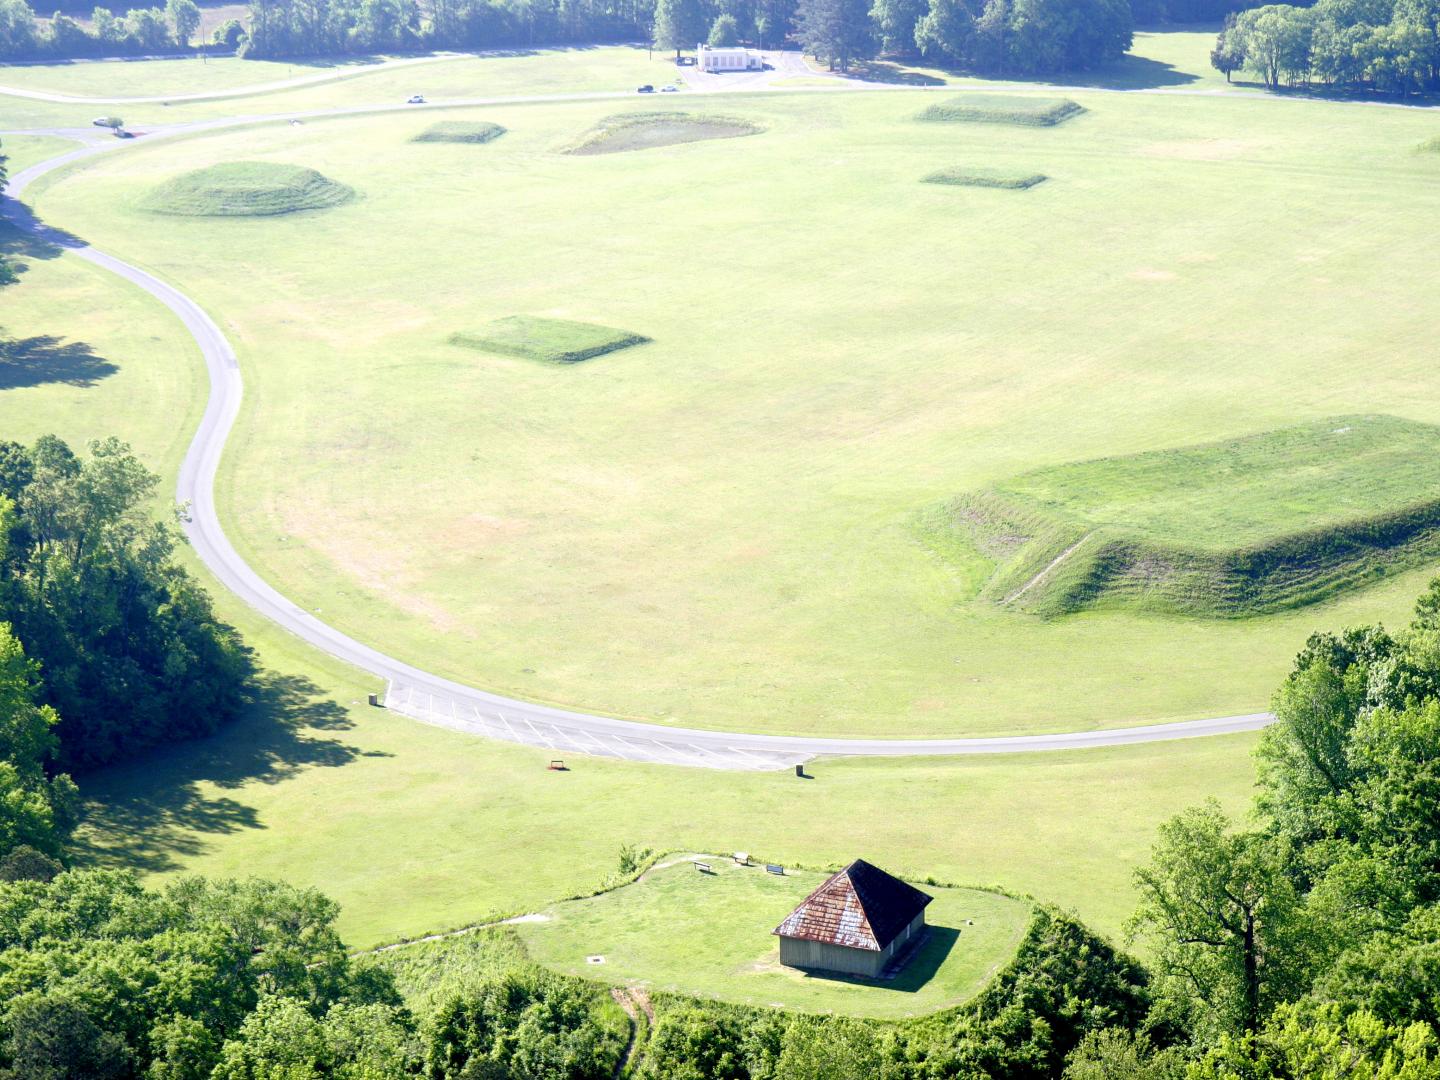 The Moundsville Archaeological Park